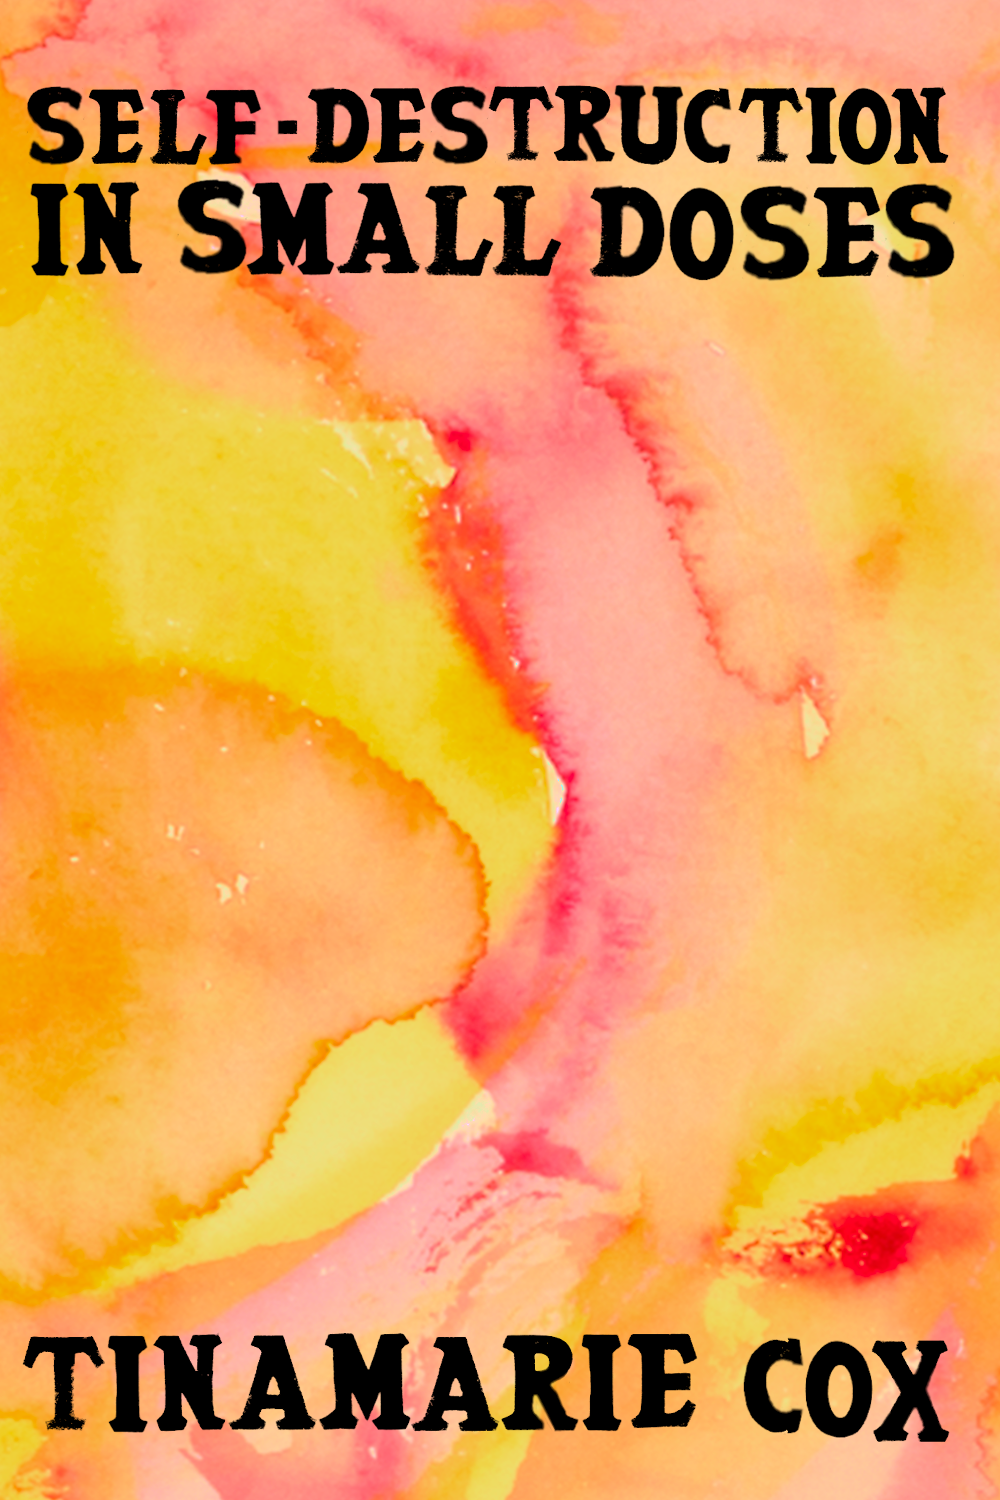 Book cover of Self-Destruction in Small Doses by Tinamarie Cox